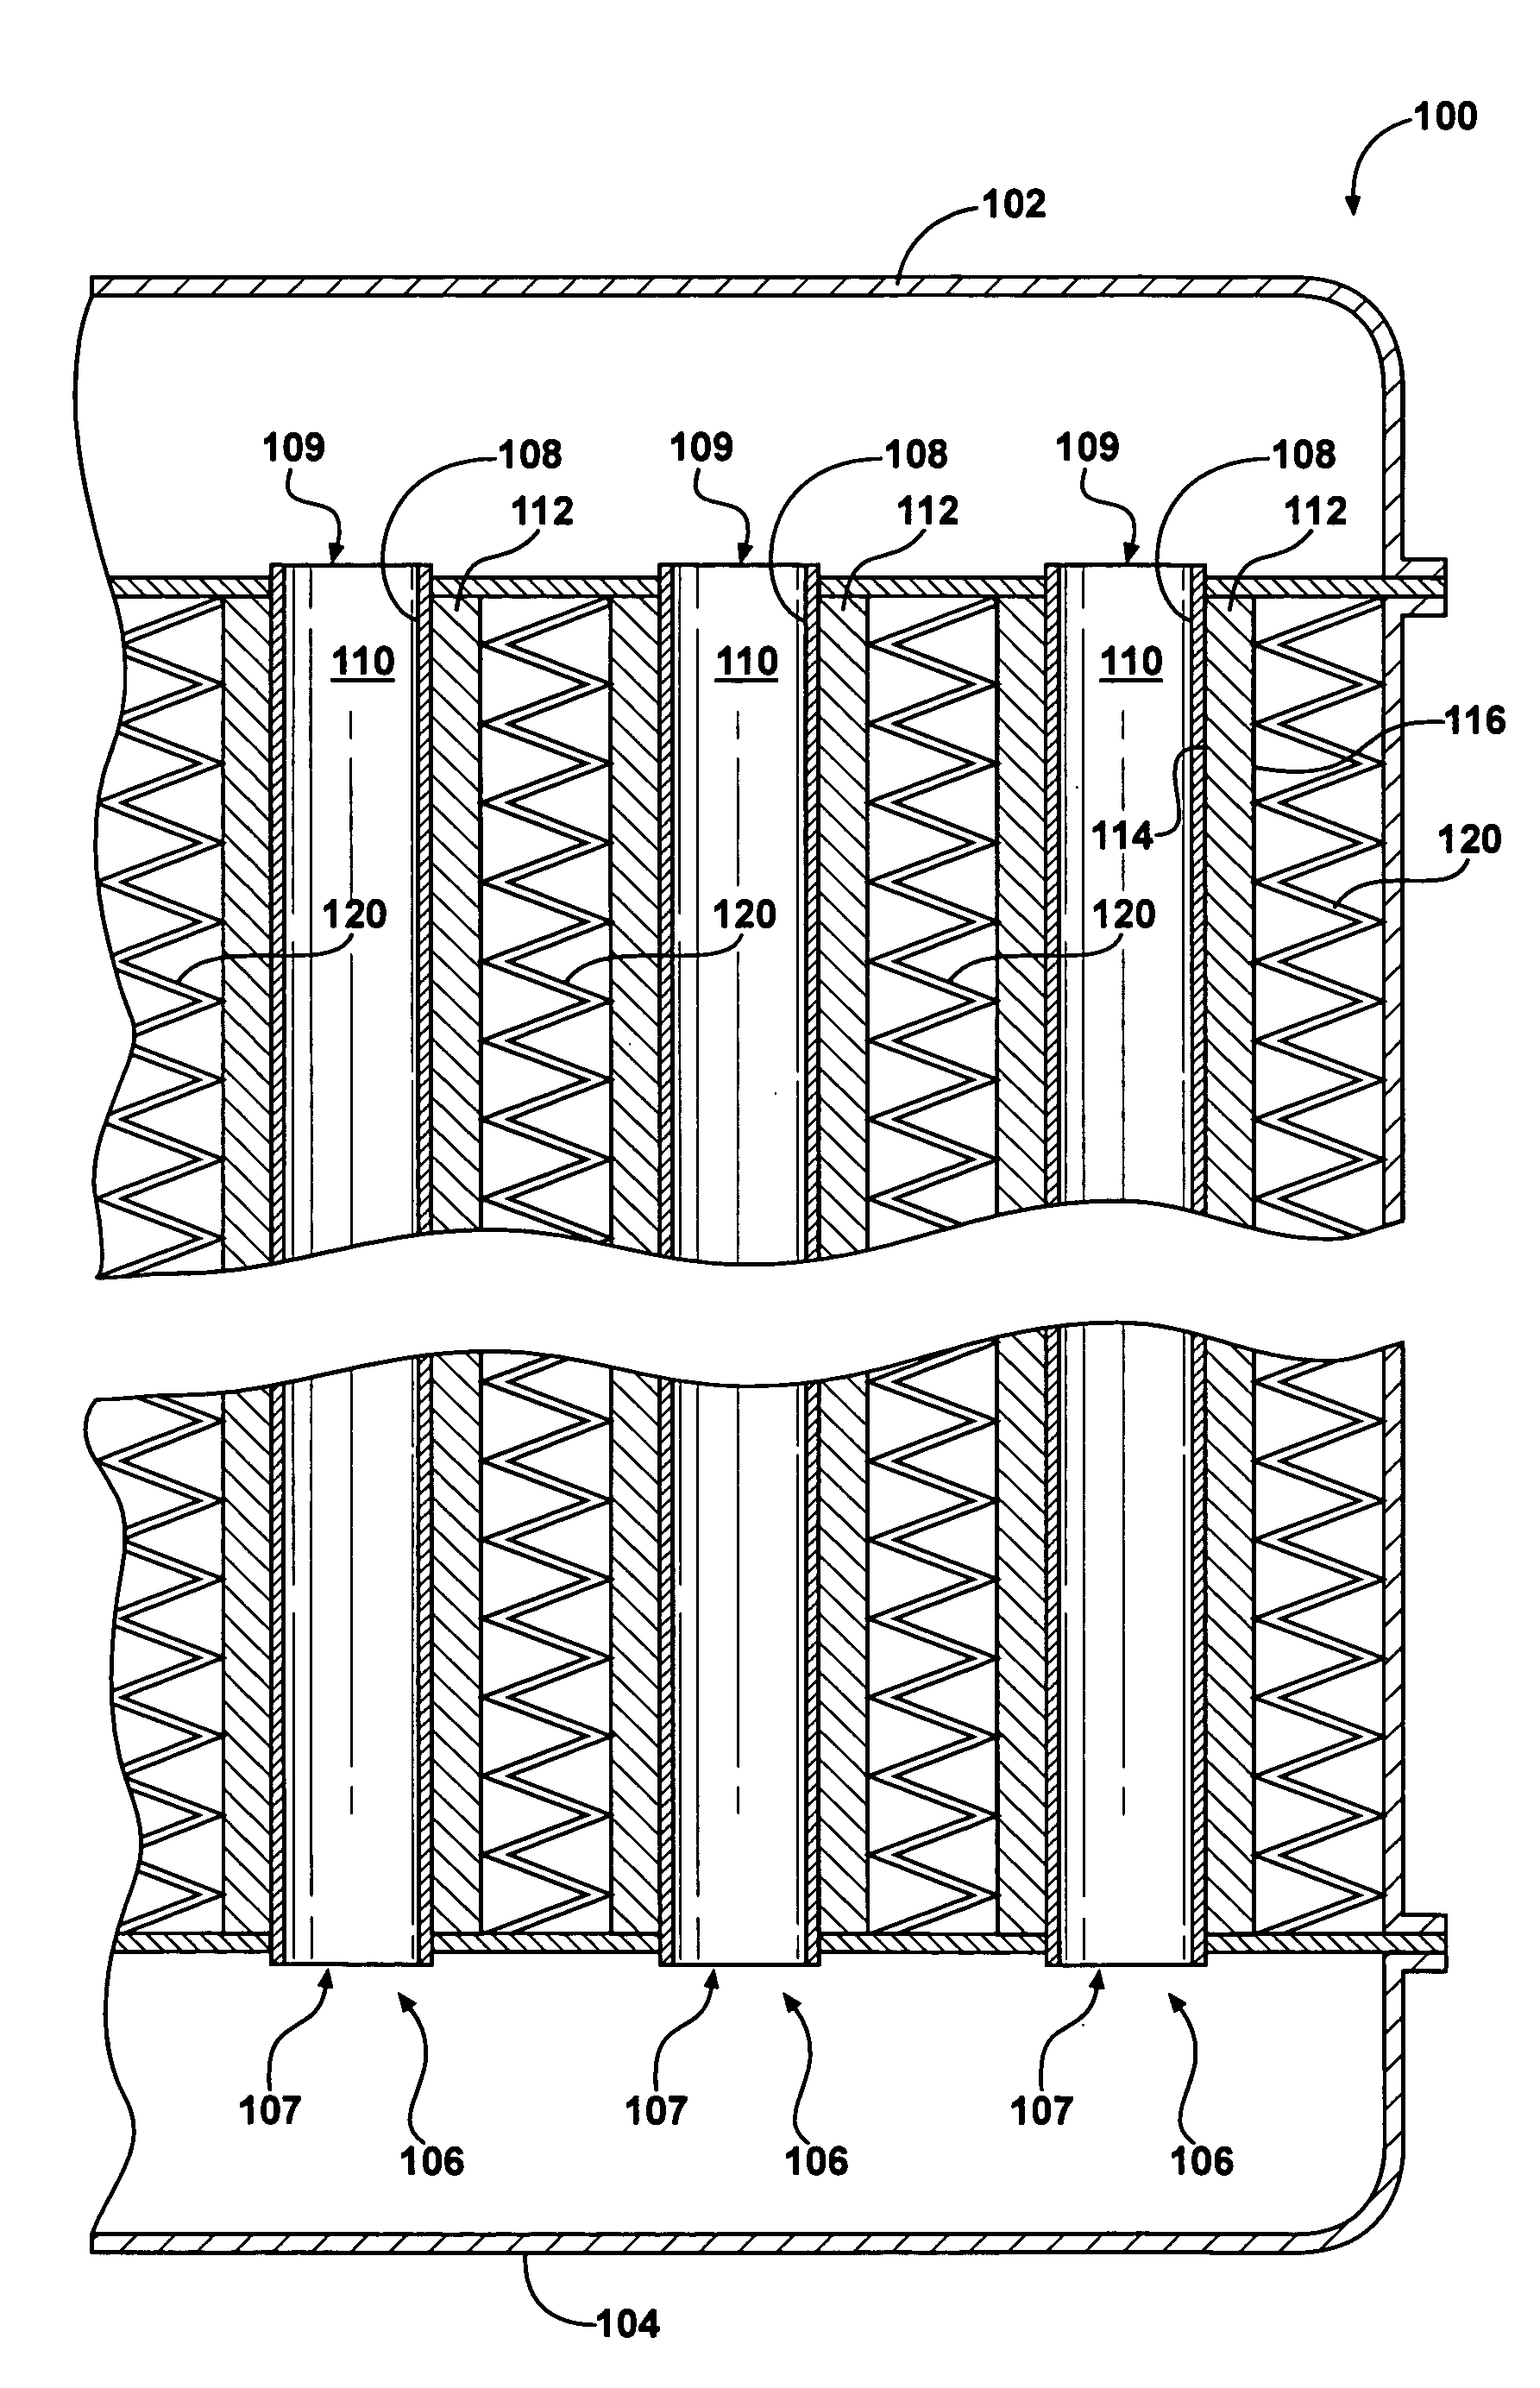 Heat exchanger tube having integrated thermoelectric devices